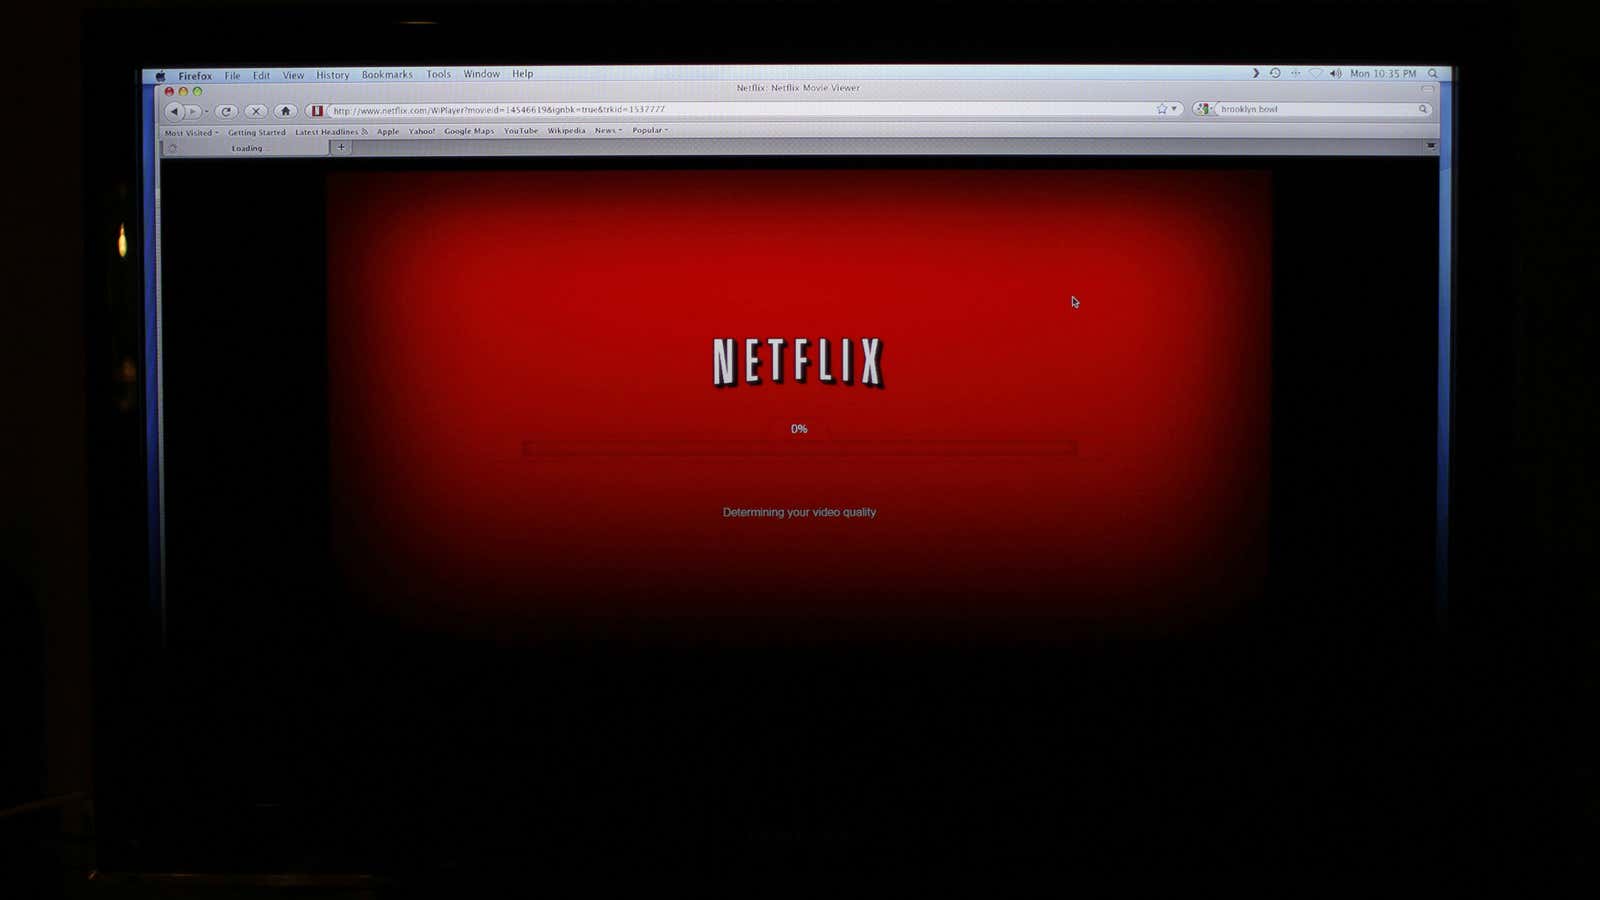 Netflix’s shareholder letter was a full-throated show of support for “net neutrality.”